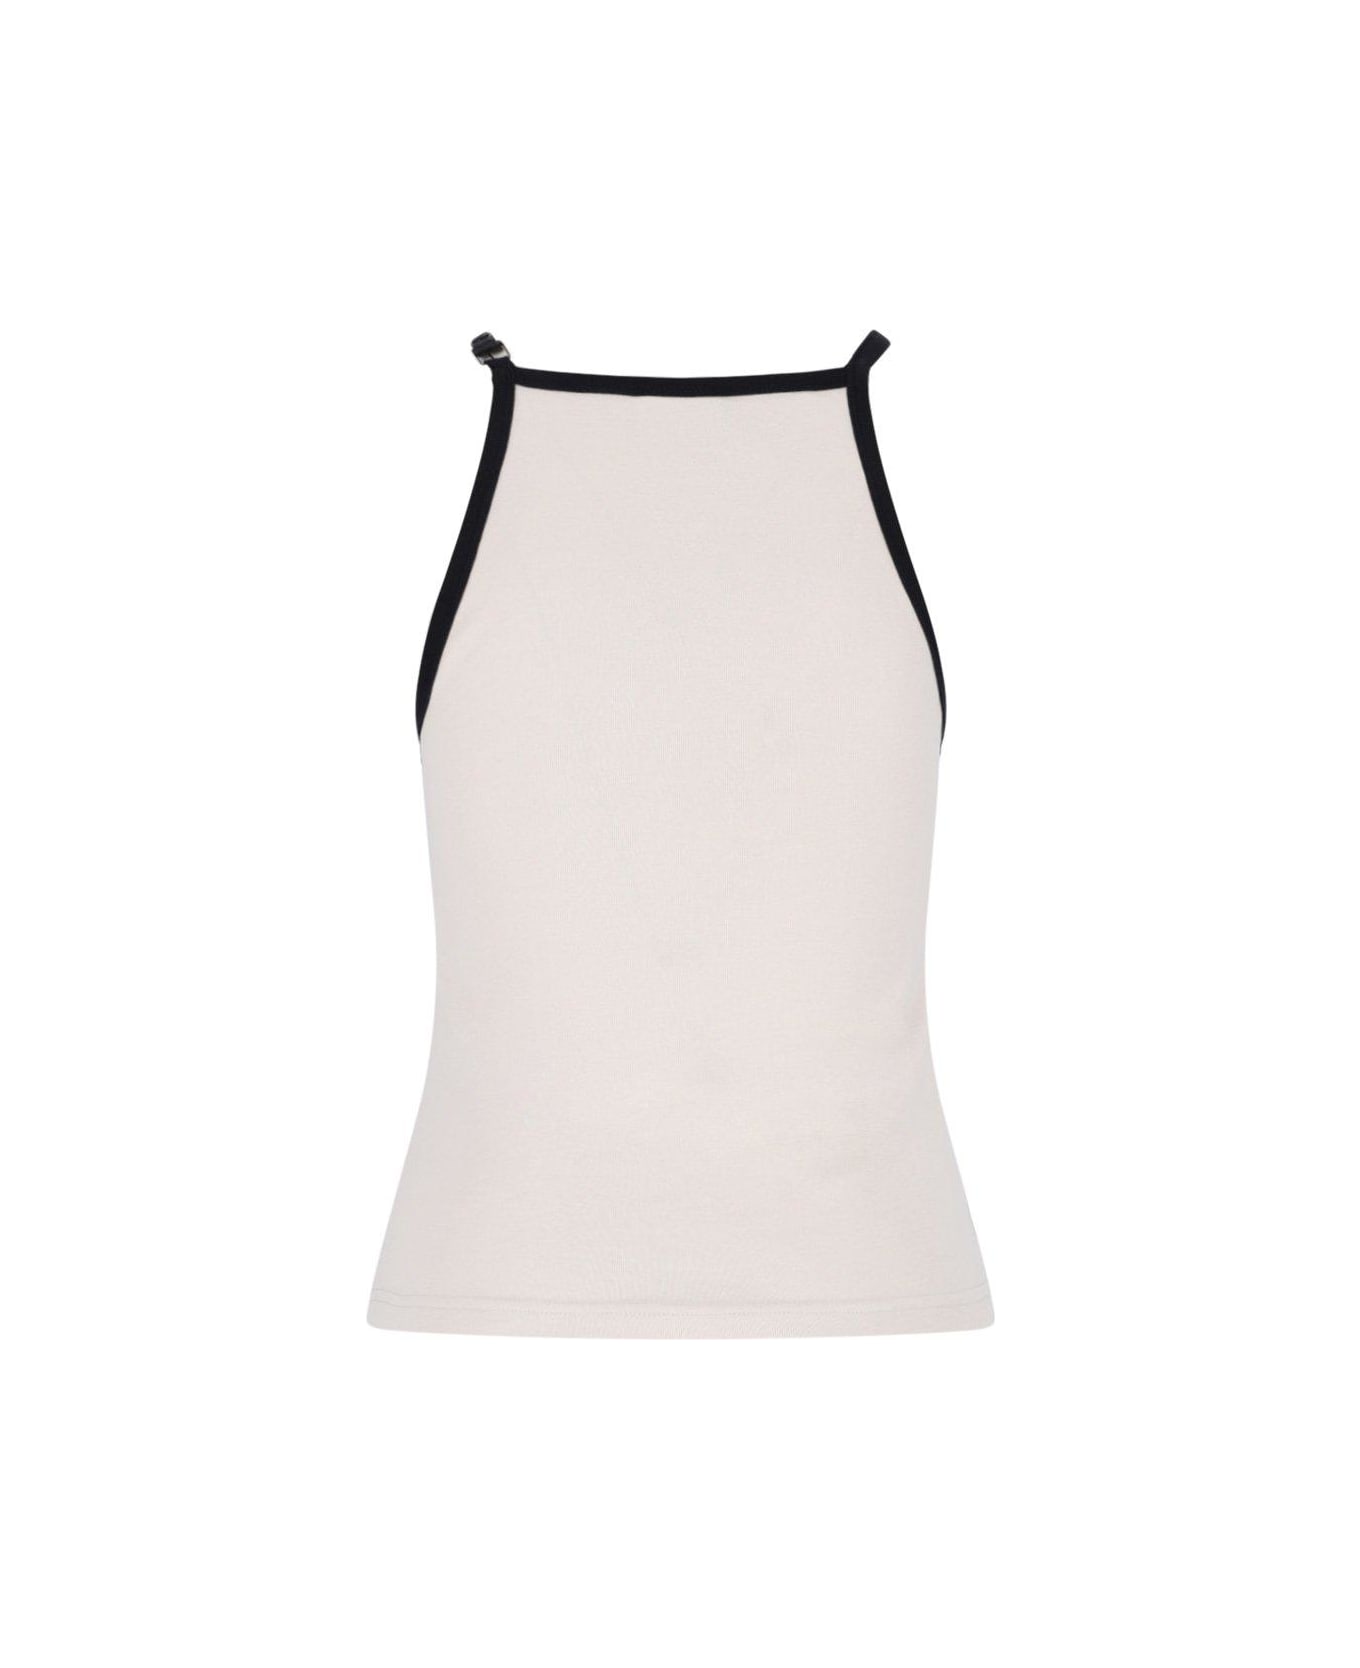 Courrèges Buckle Contrast Tank Top - LIME STONE / BLACK タンクトップ